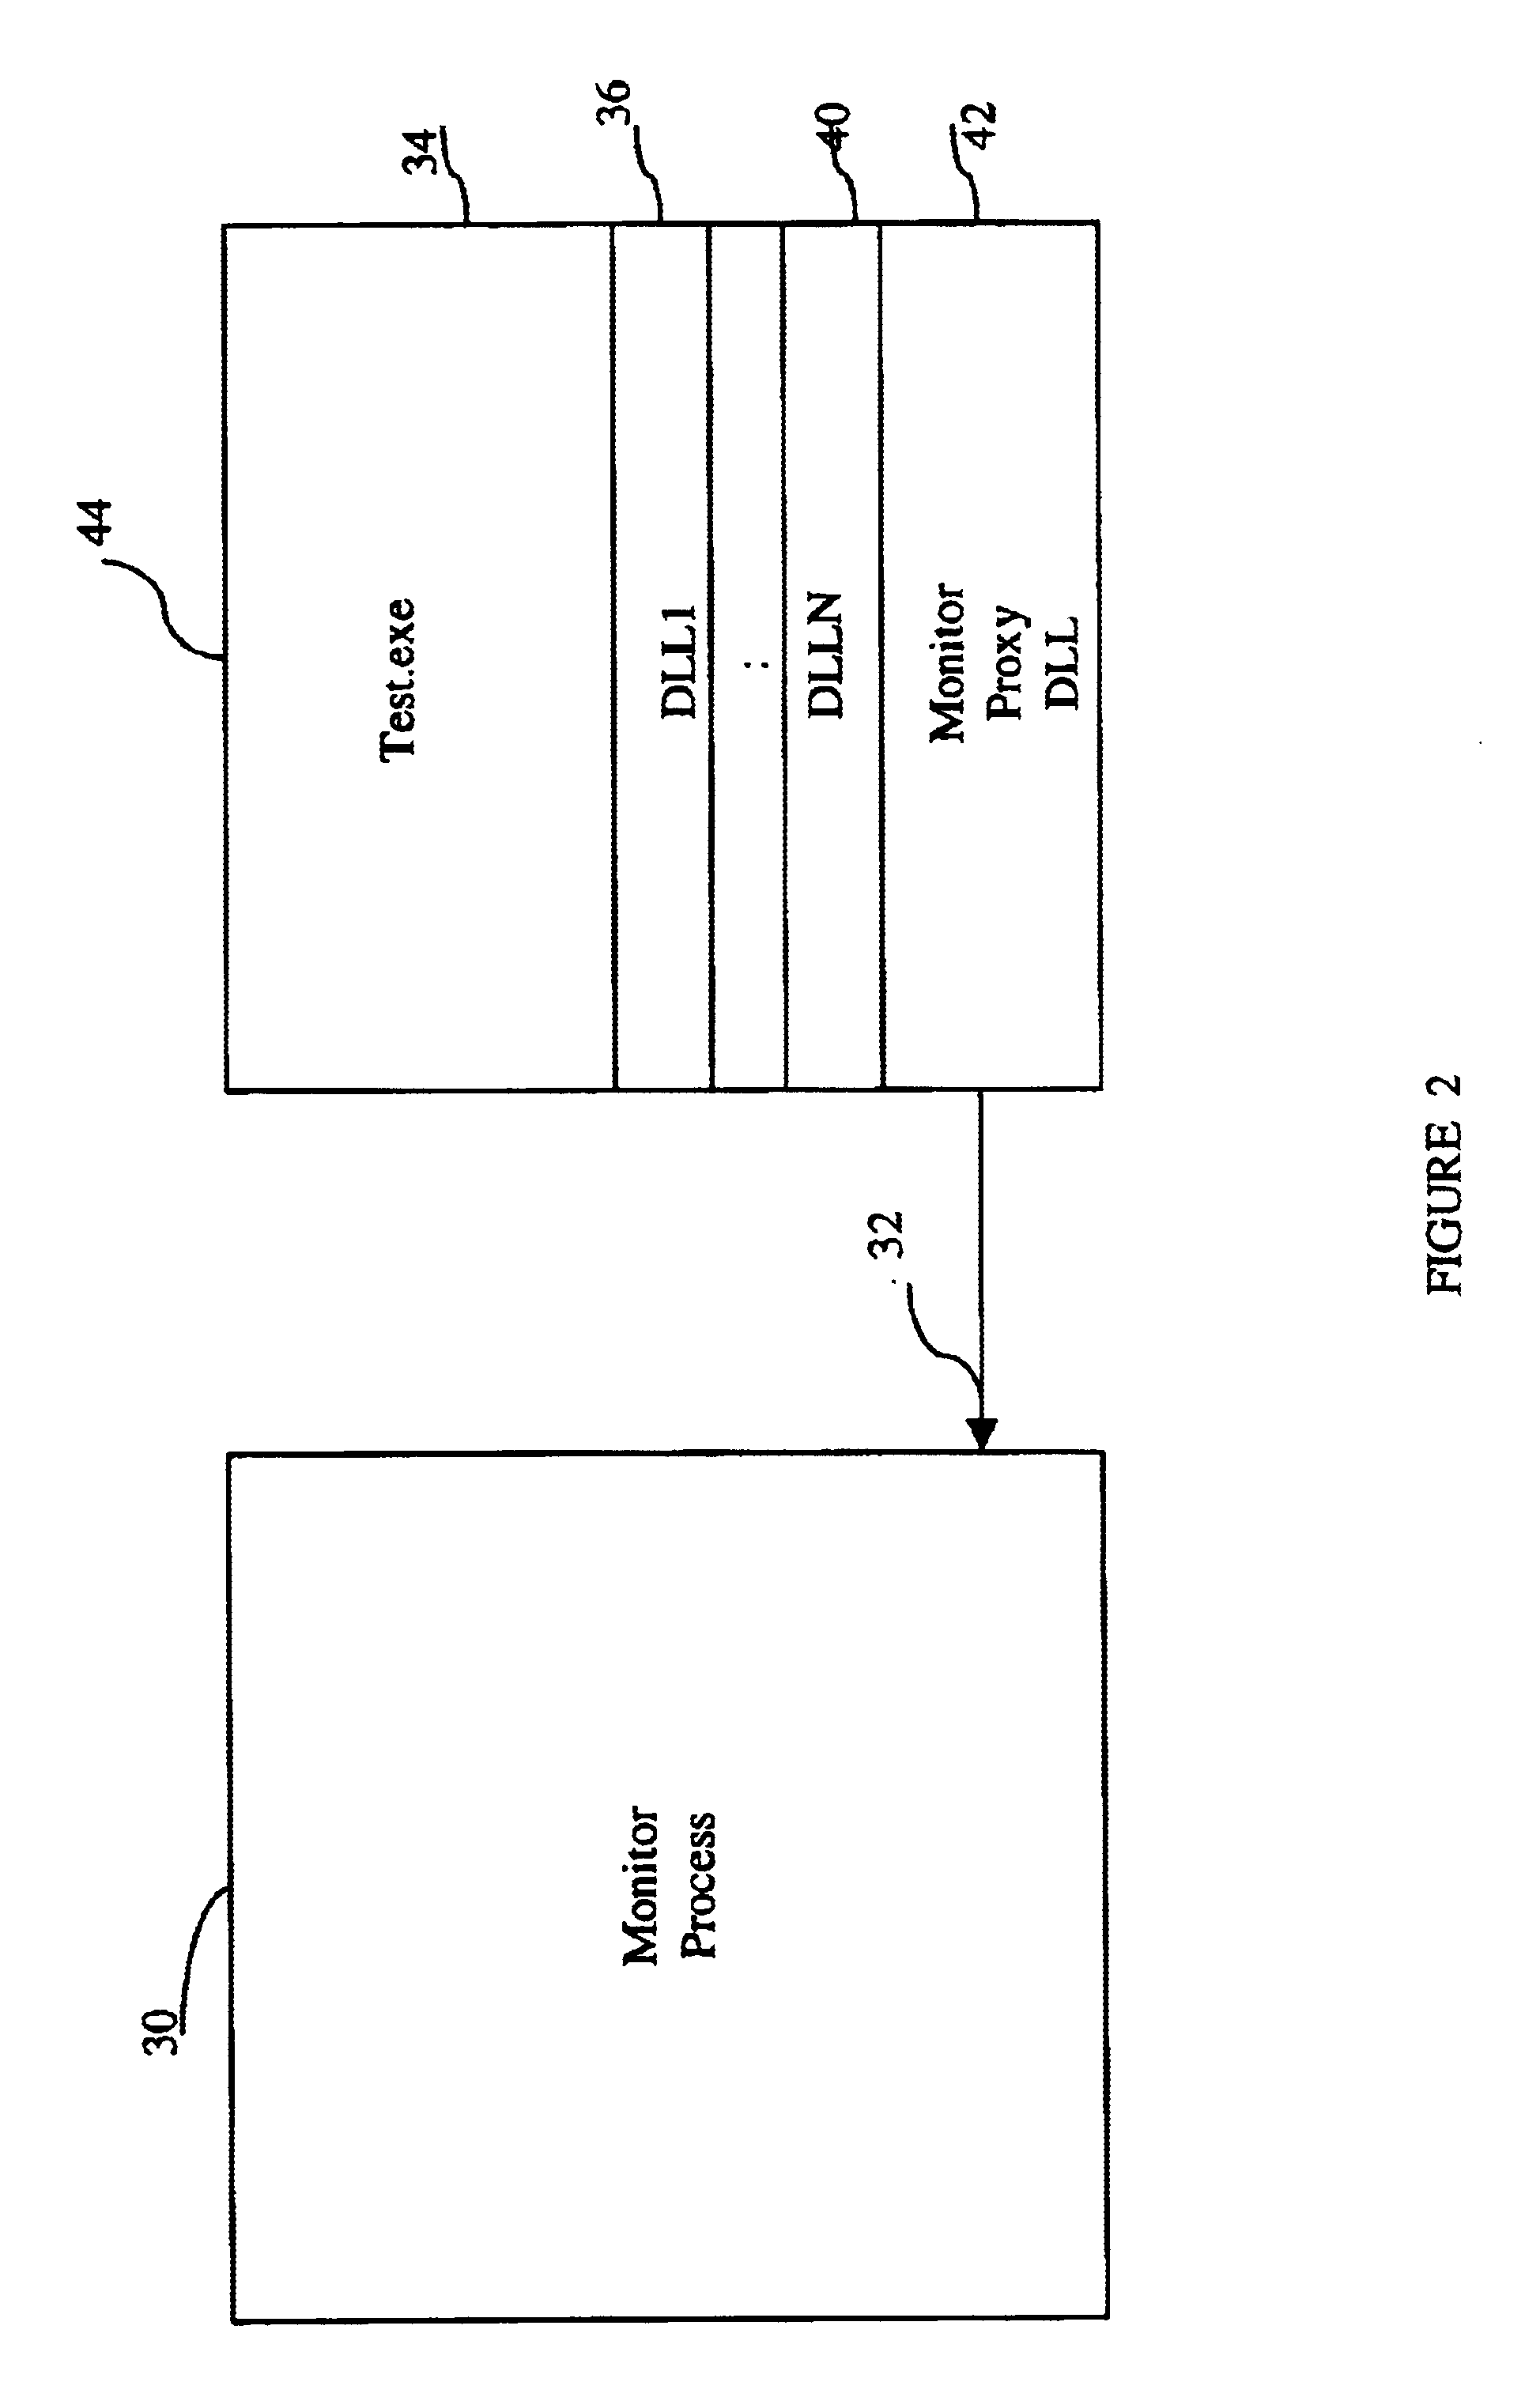 Managing hardware and software configuration information of systems being tested